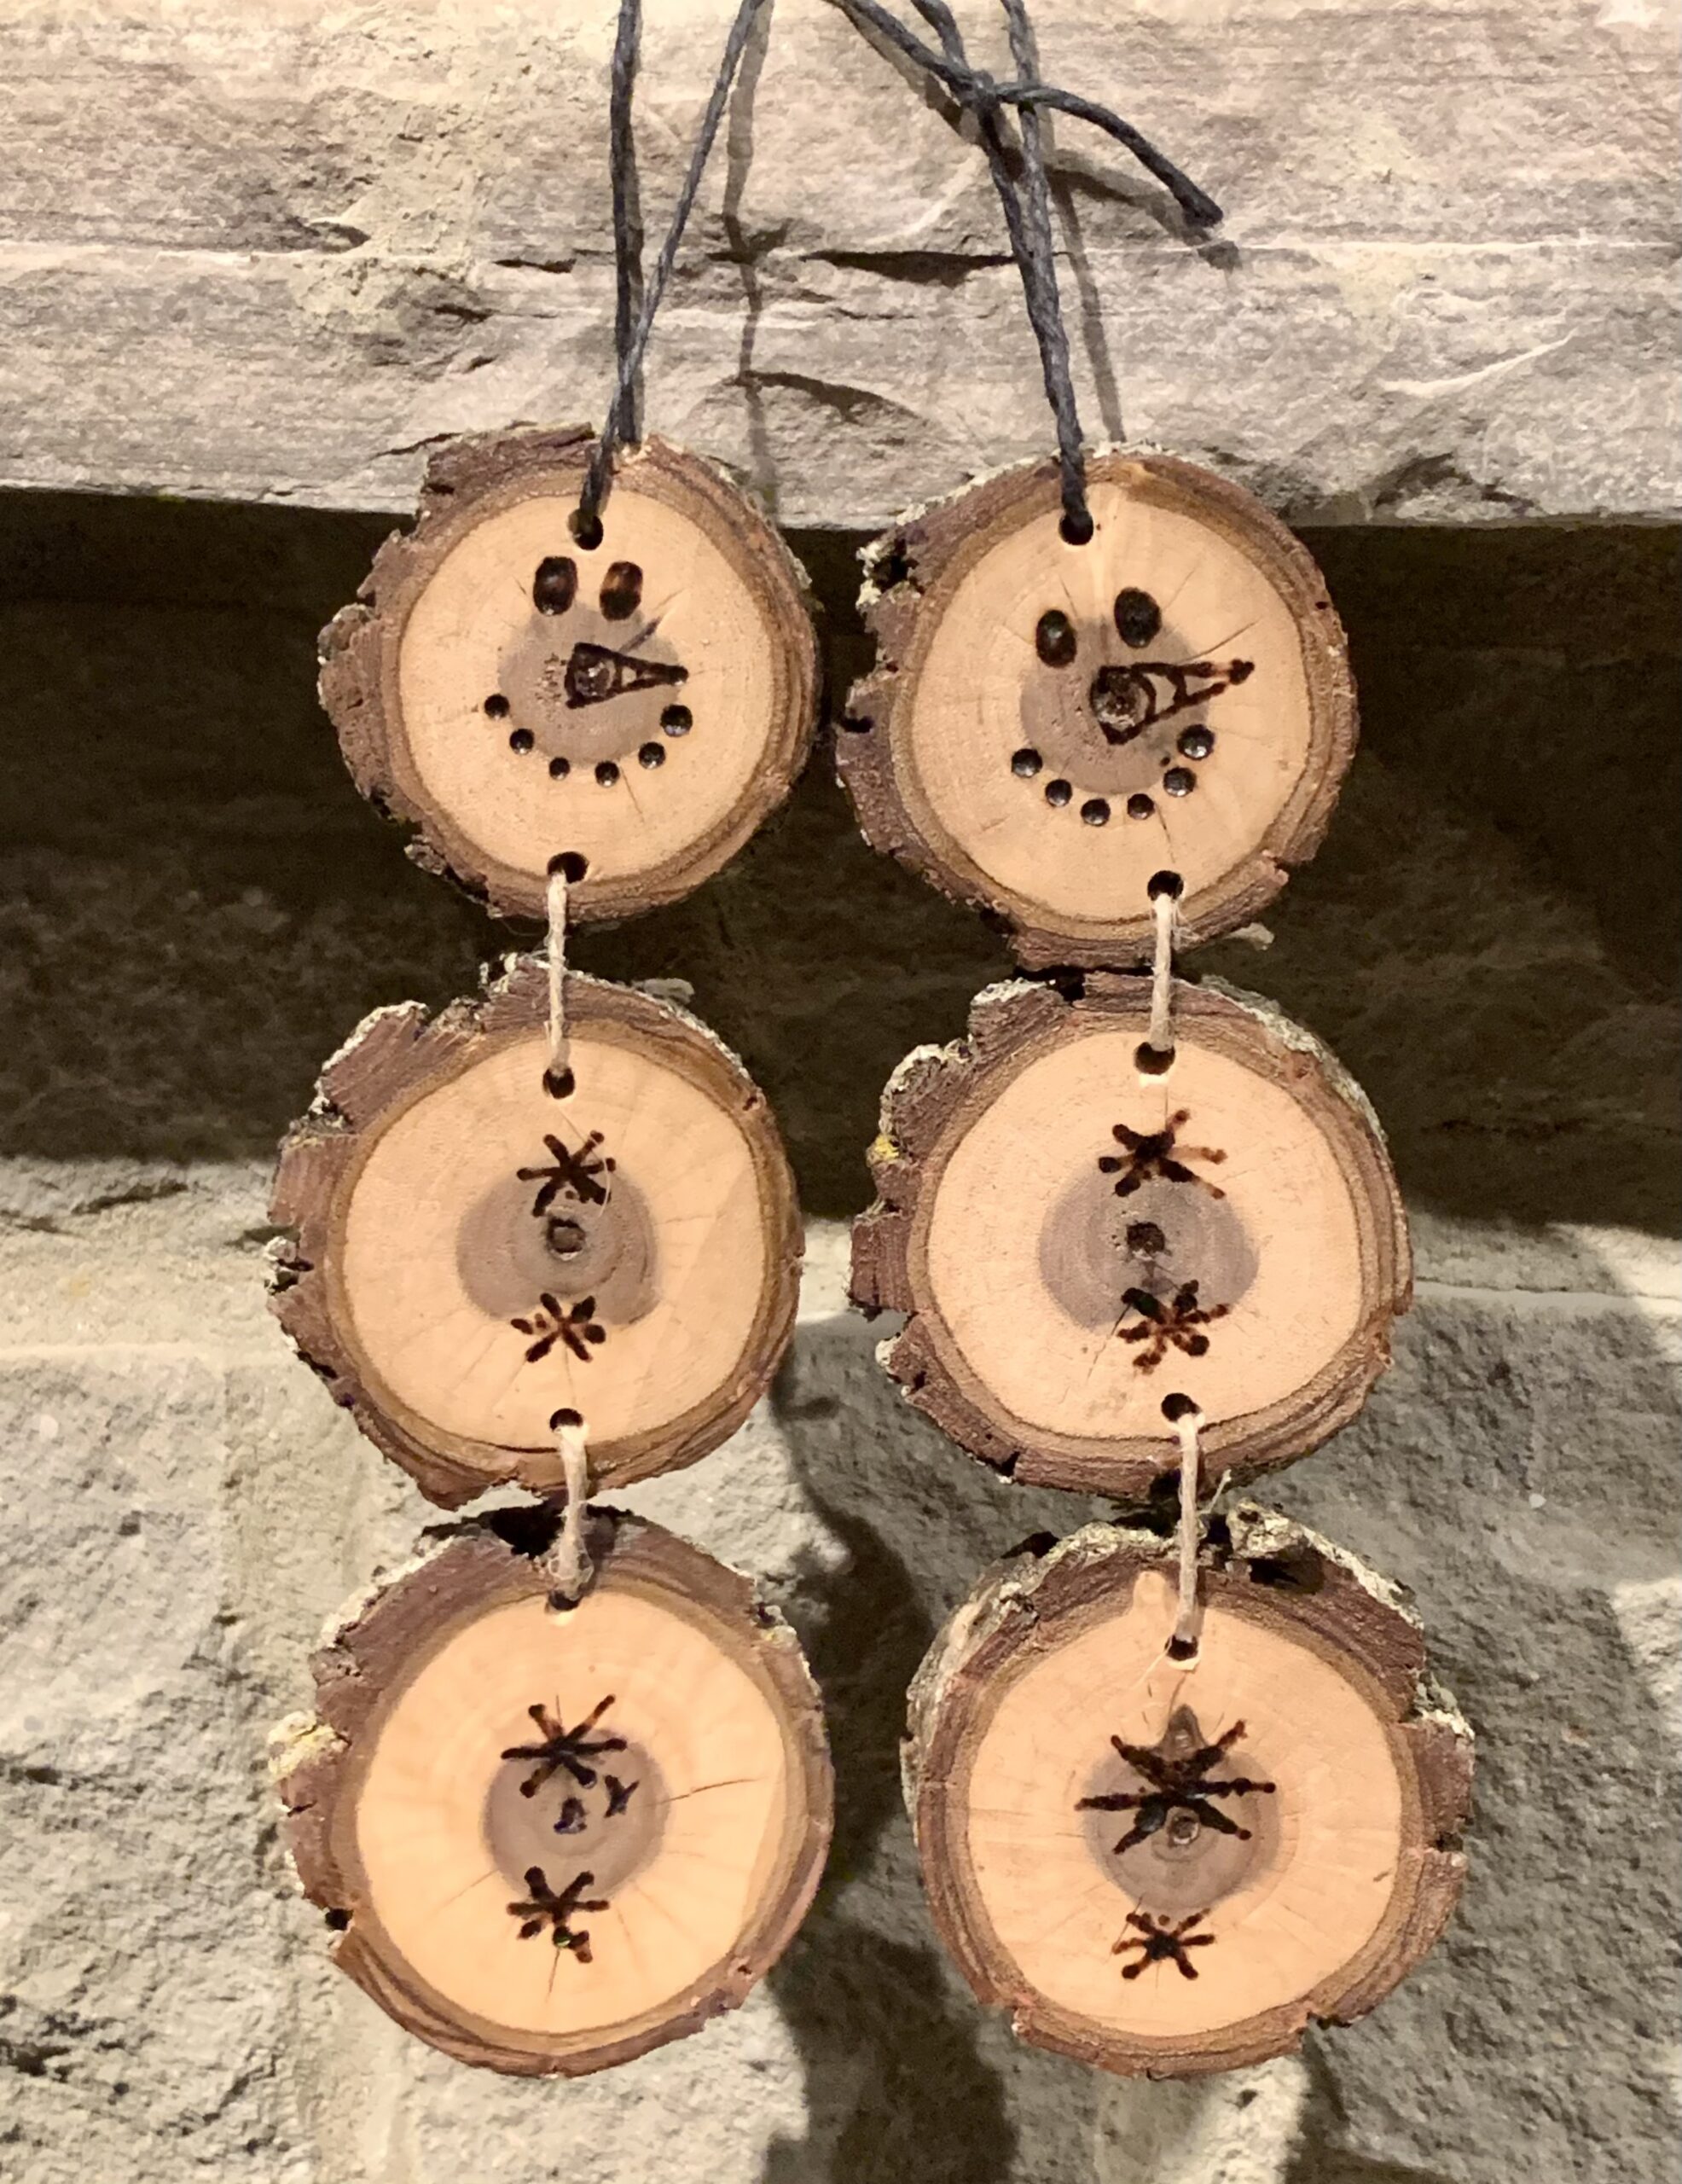 Live Edge Wood Ornament Product from EdgeWorks Creations